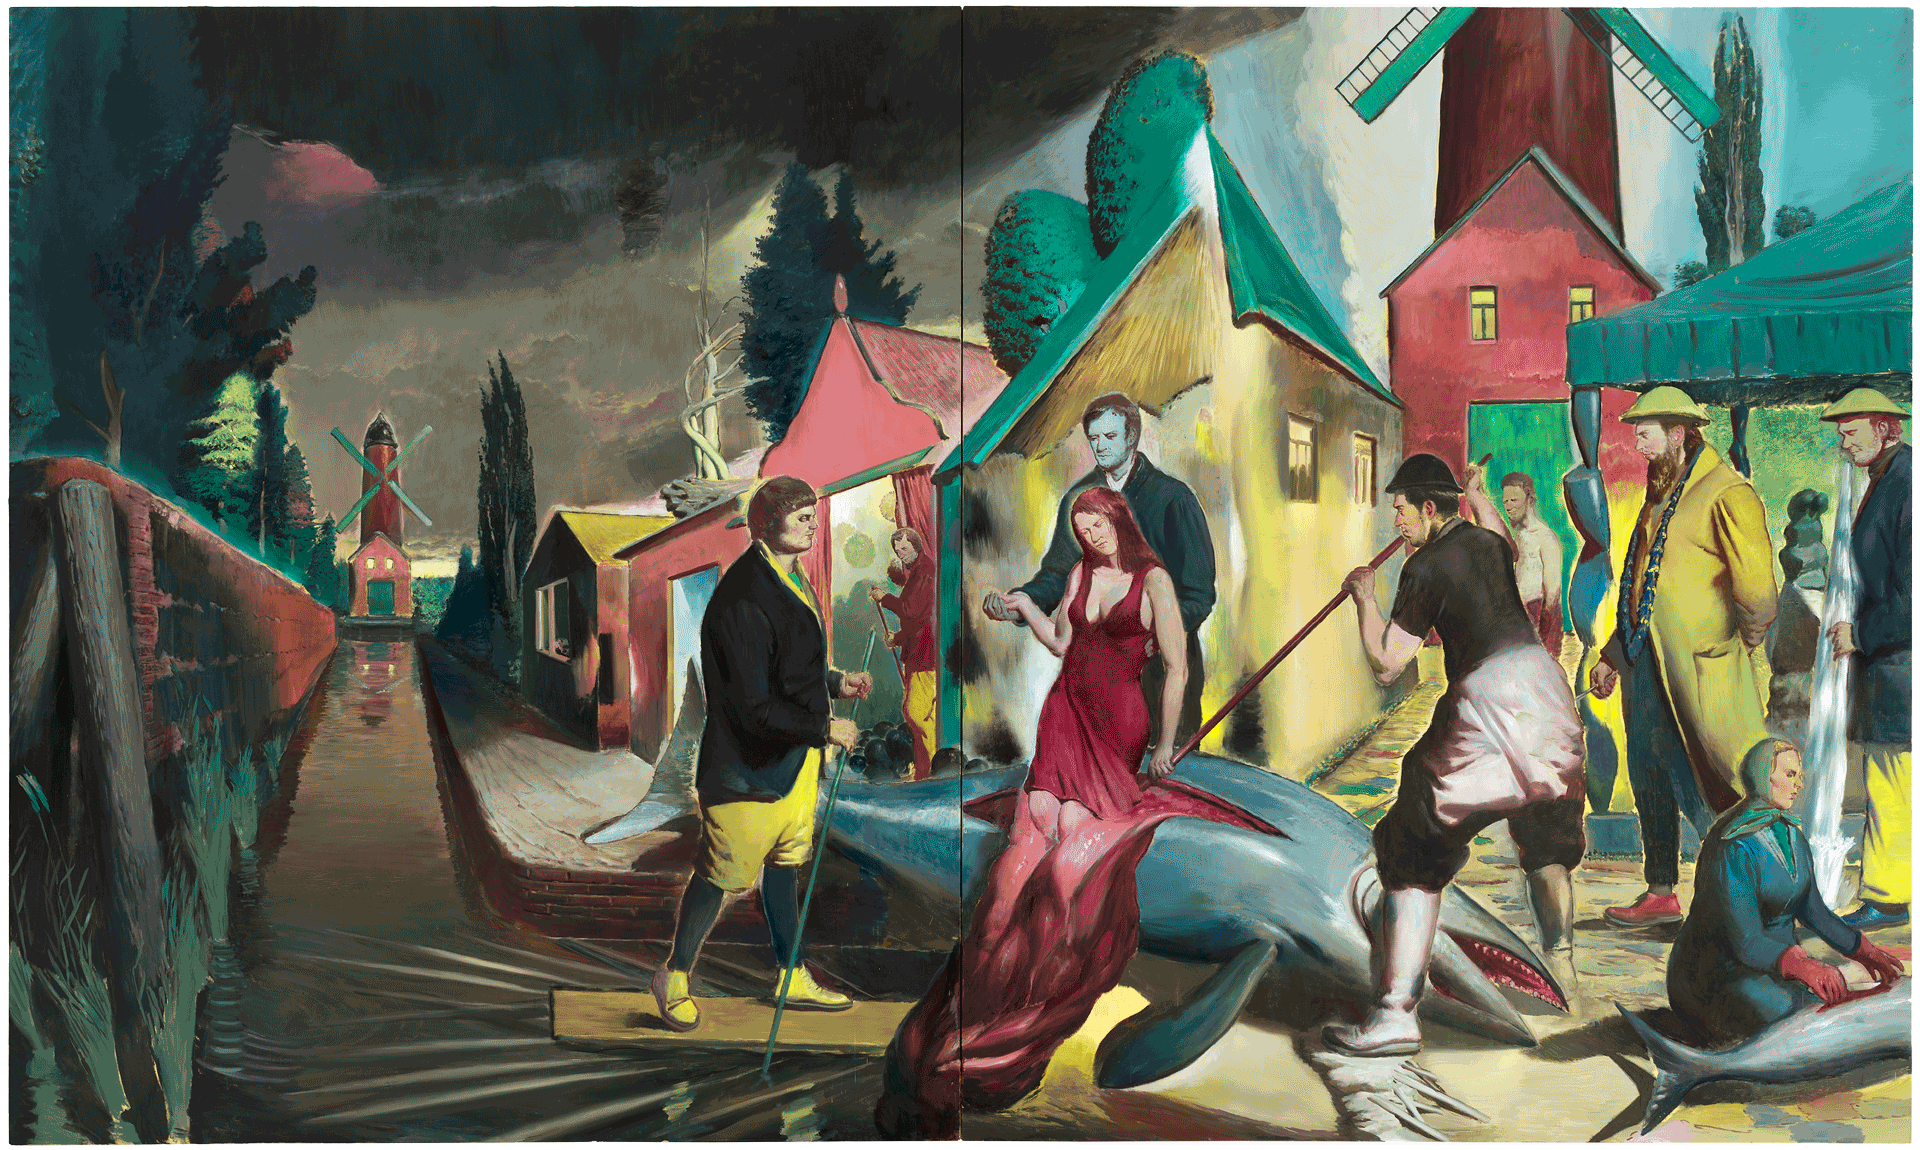 A painting by Neo Rauch, titled Der Blaue Fisch, dated 2014.